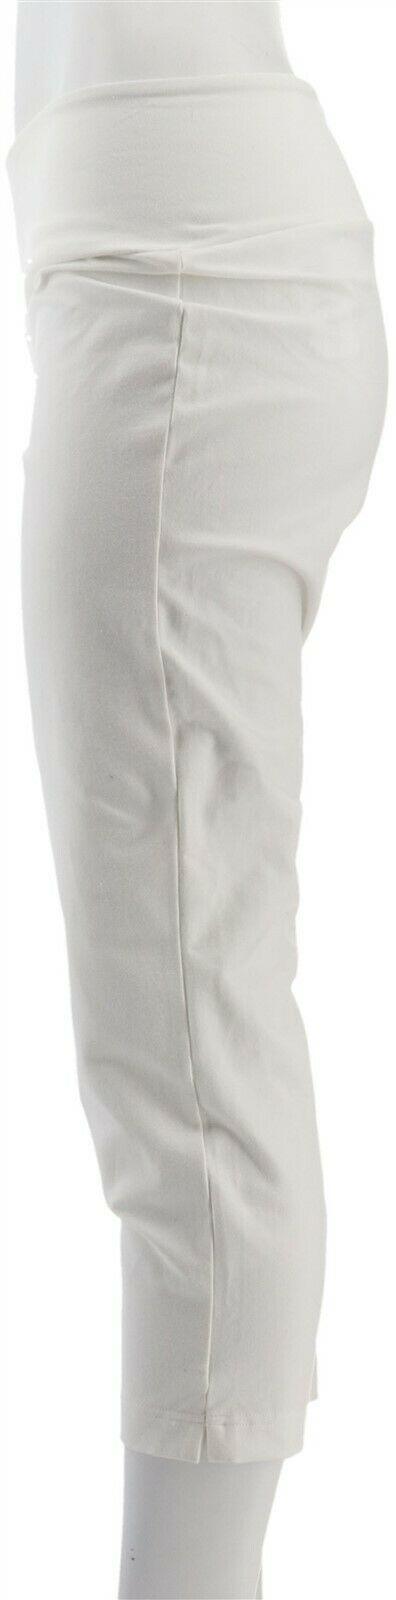 Women with Control Tall Tummy Control Set 2 Pants Chalk White L NEW A344736